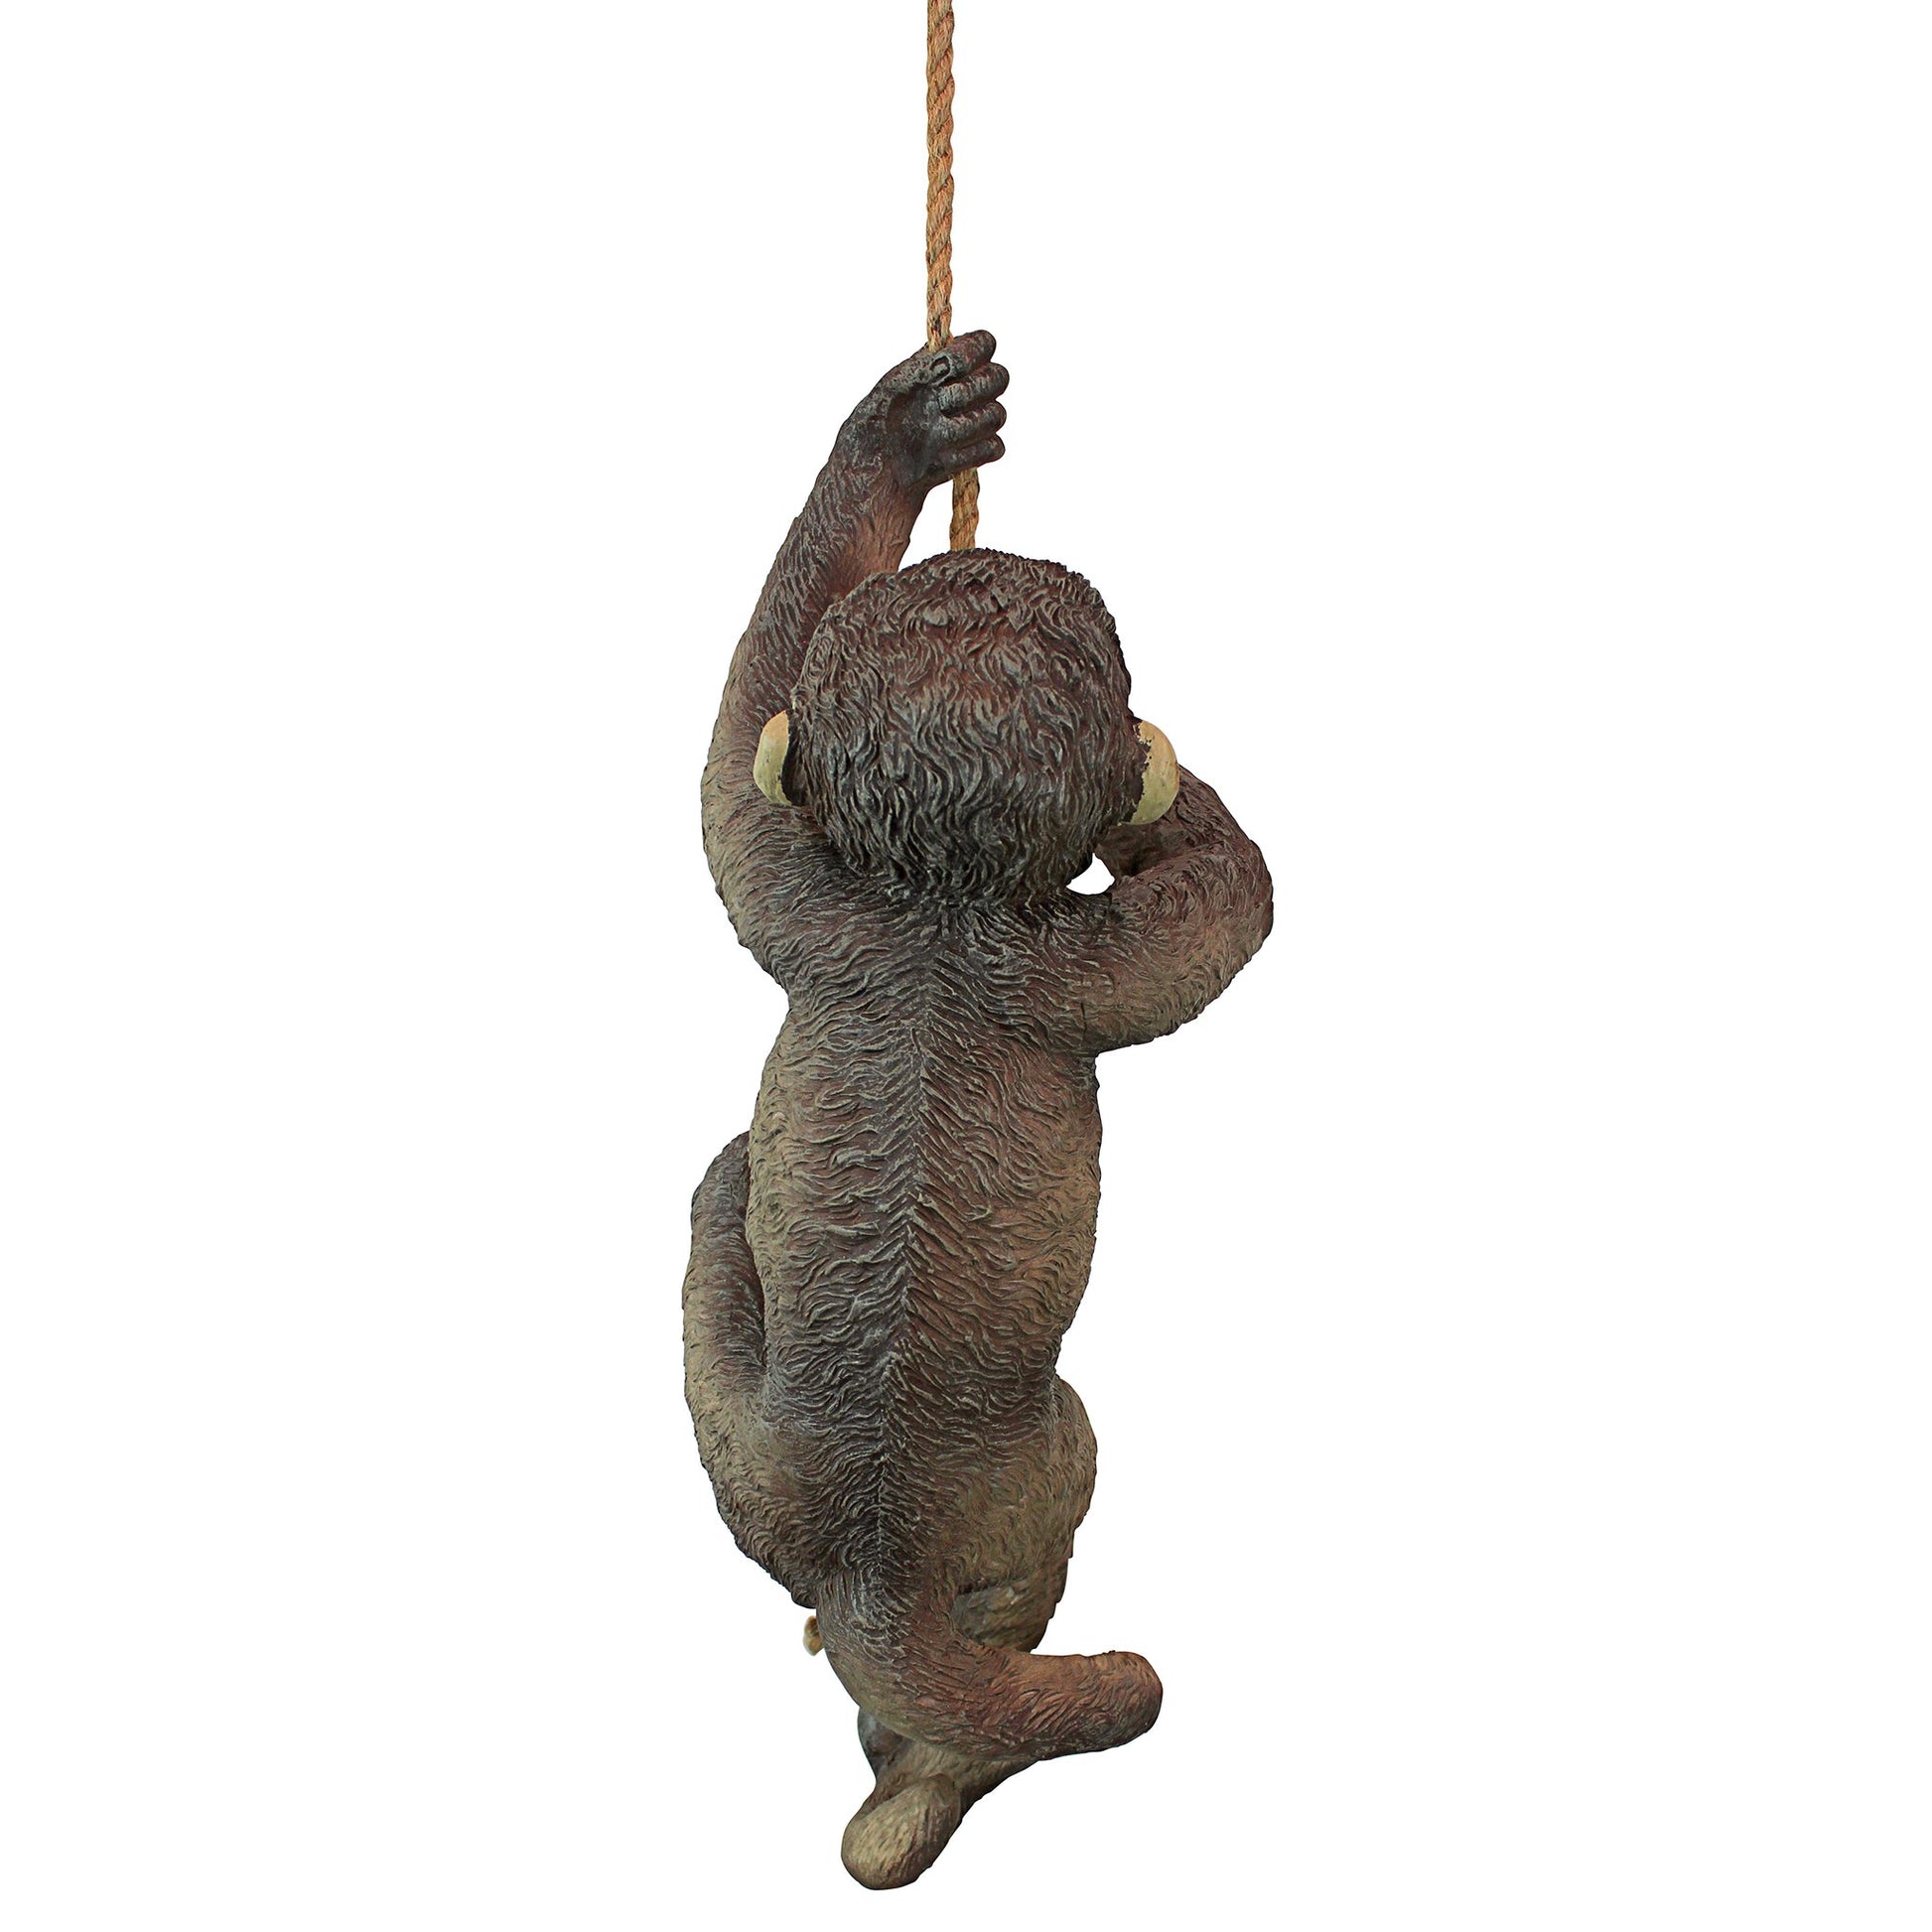 Back view of a fake monkey made from resin climbing up a rope on a white background